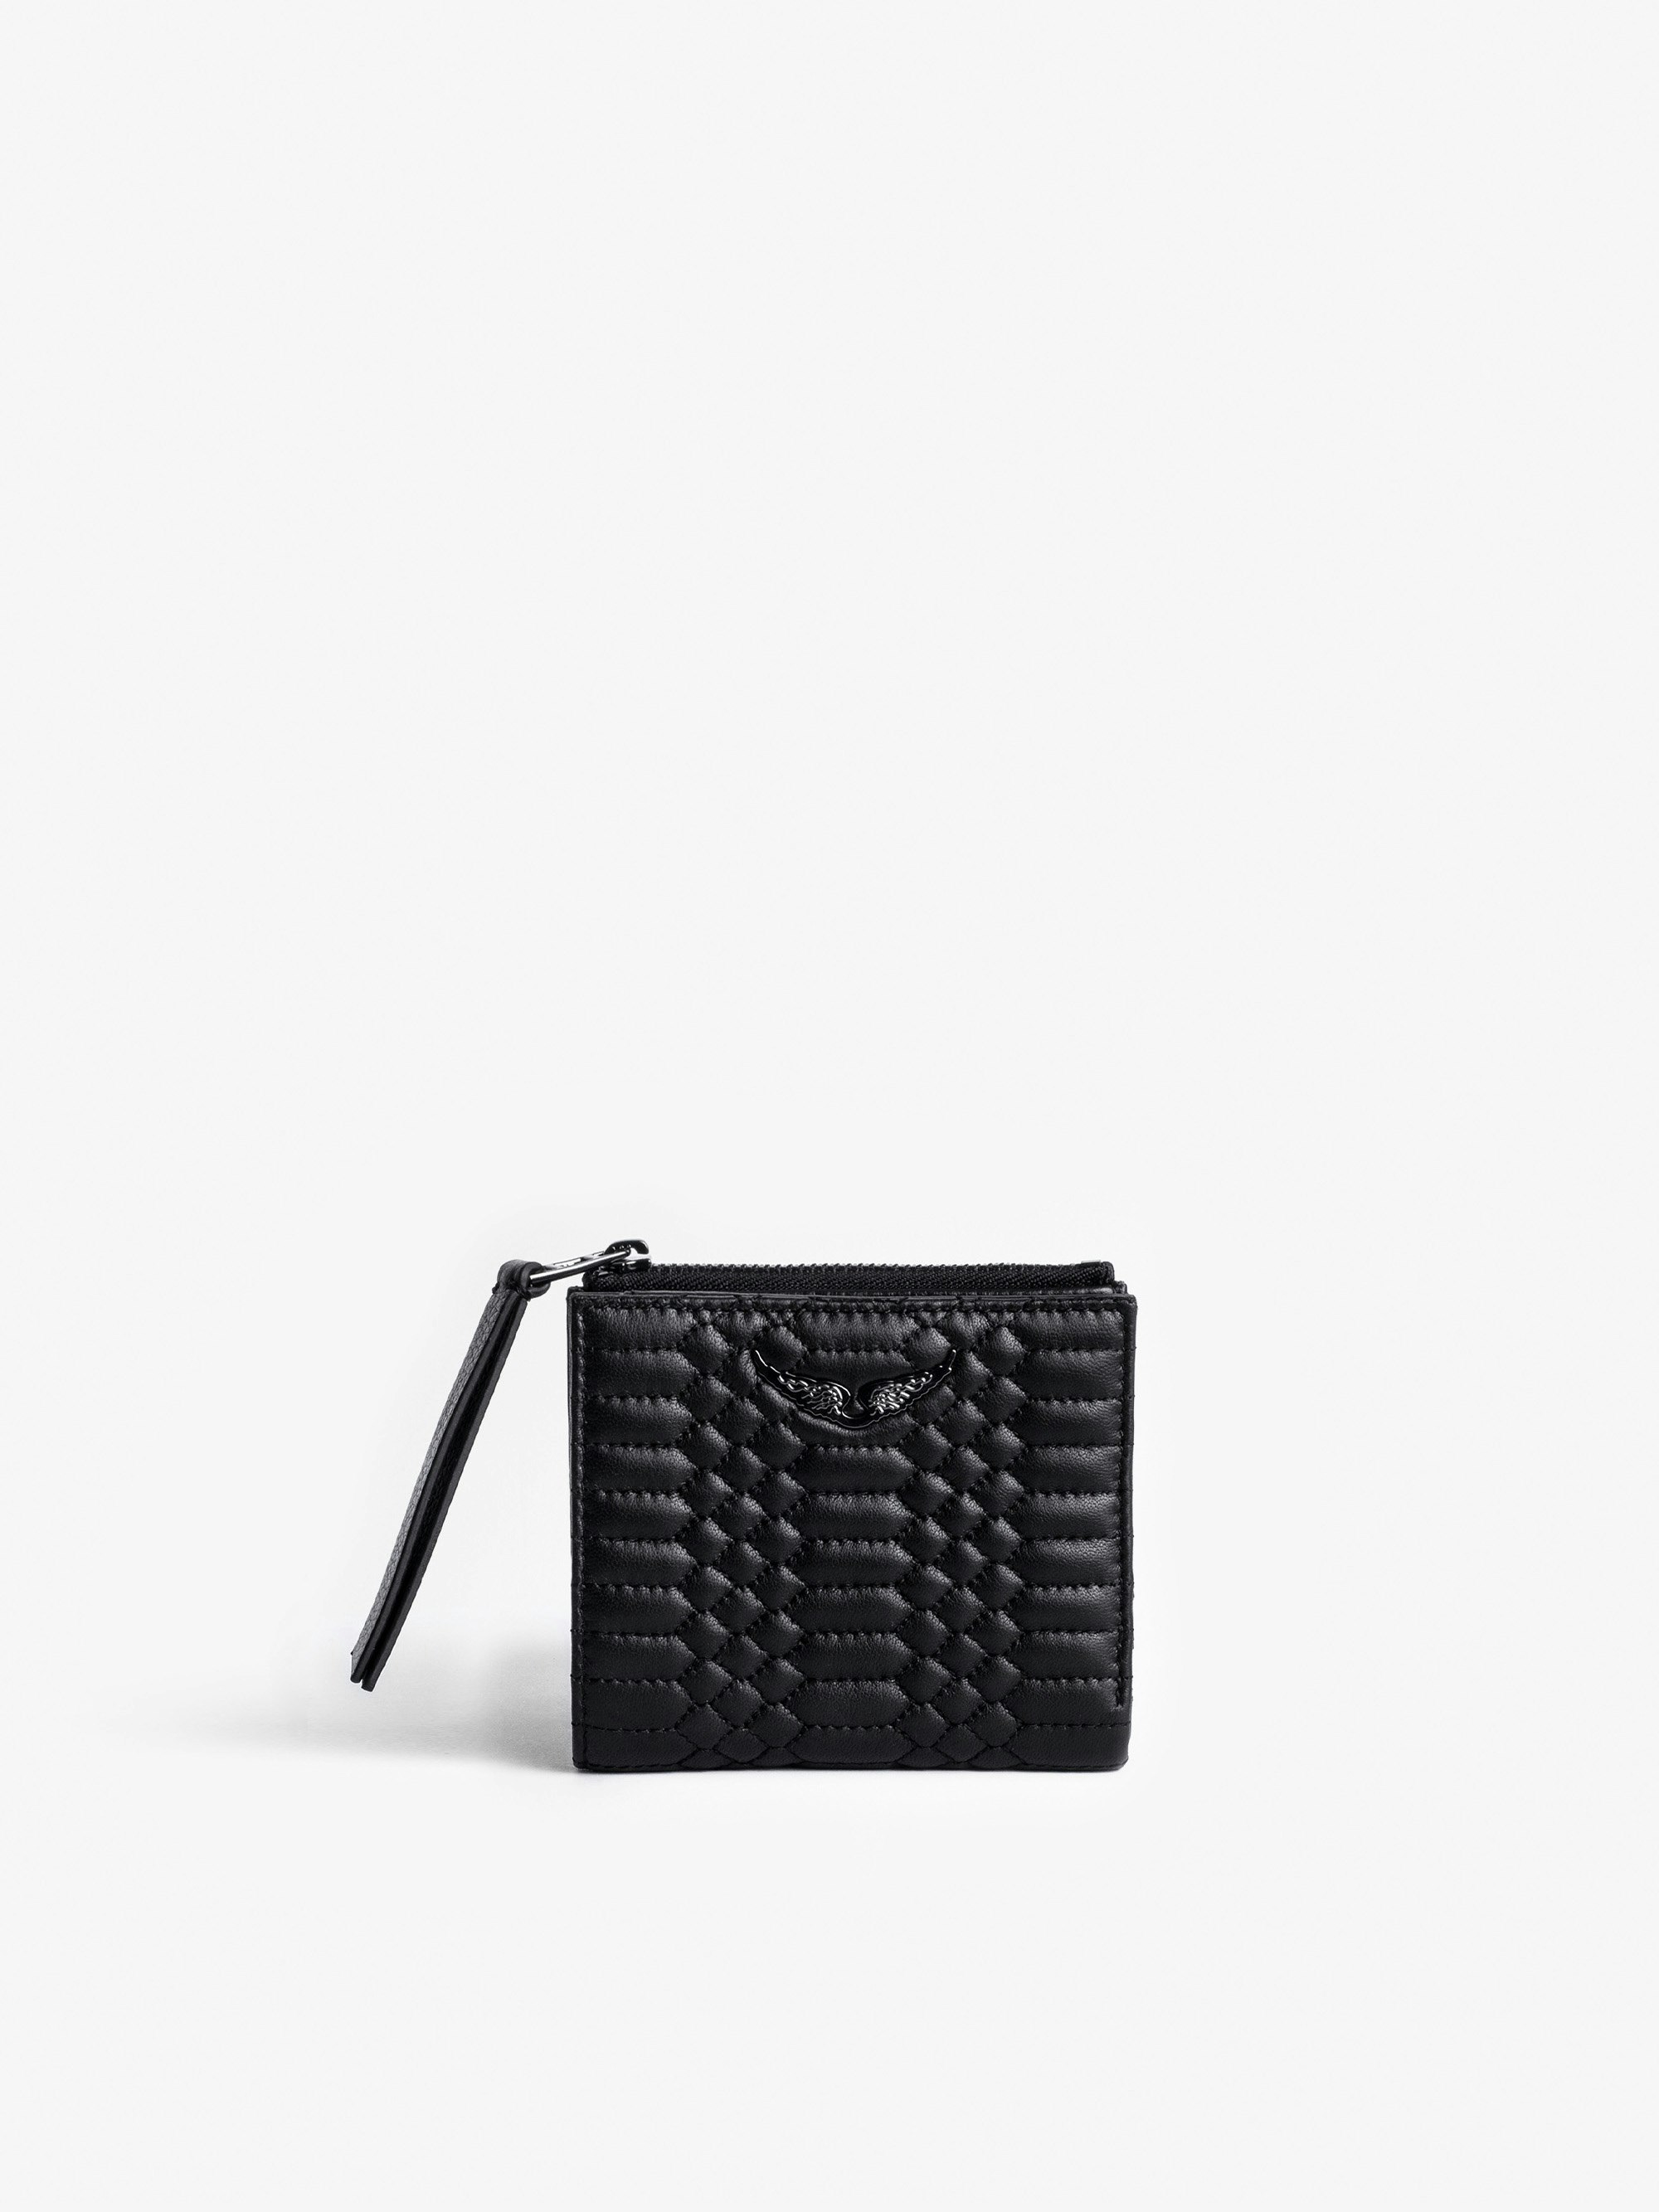 ZV Fold Purse - Quilted lambskin leather purse in black